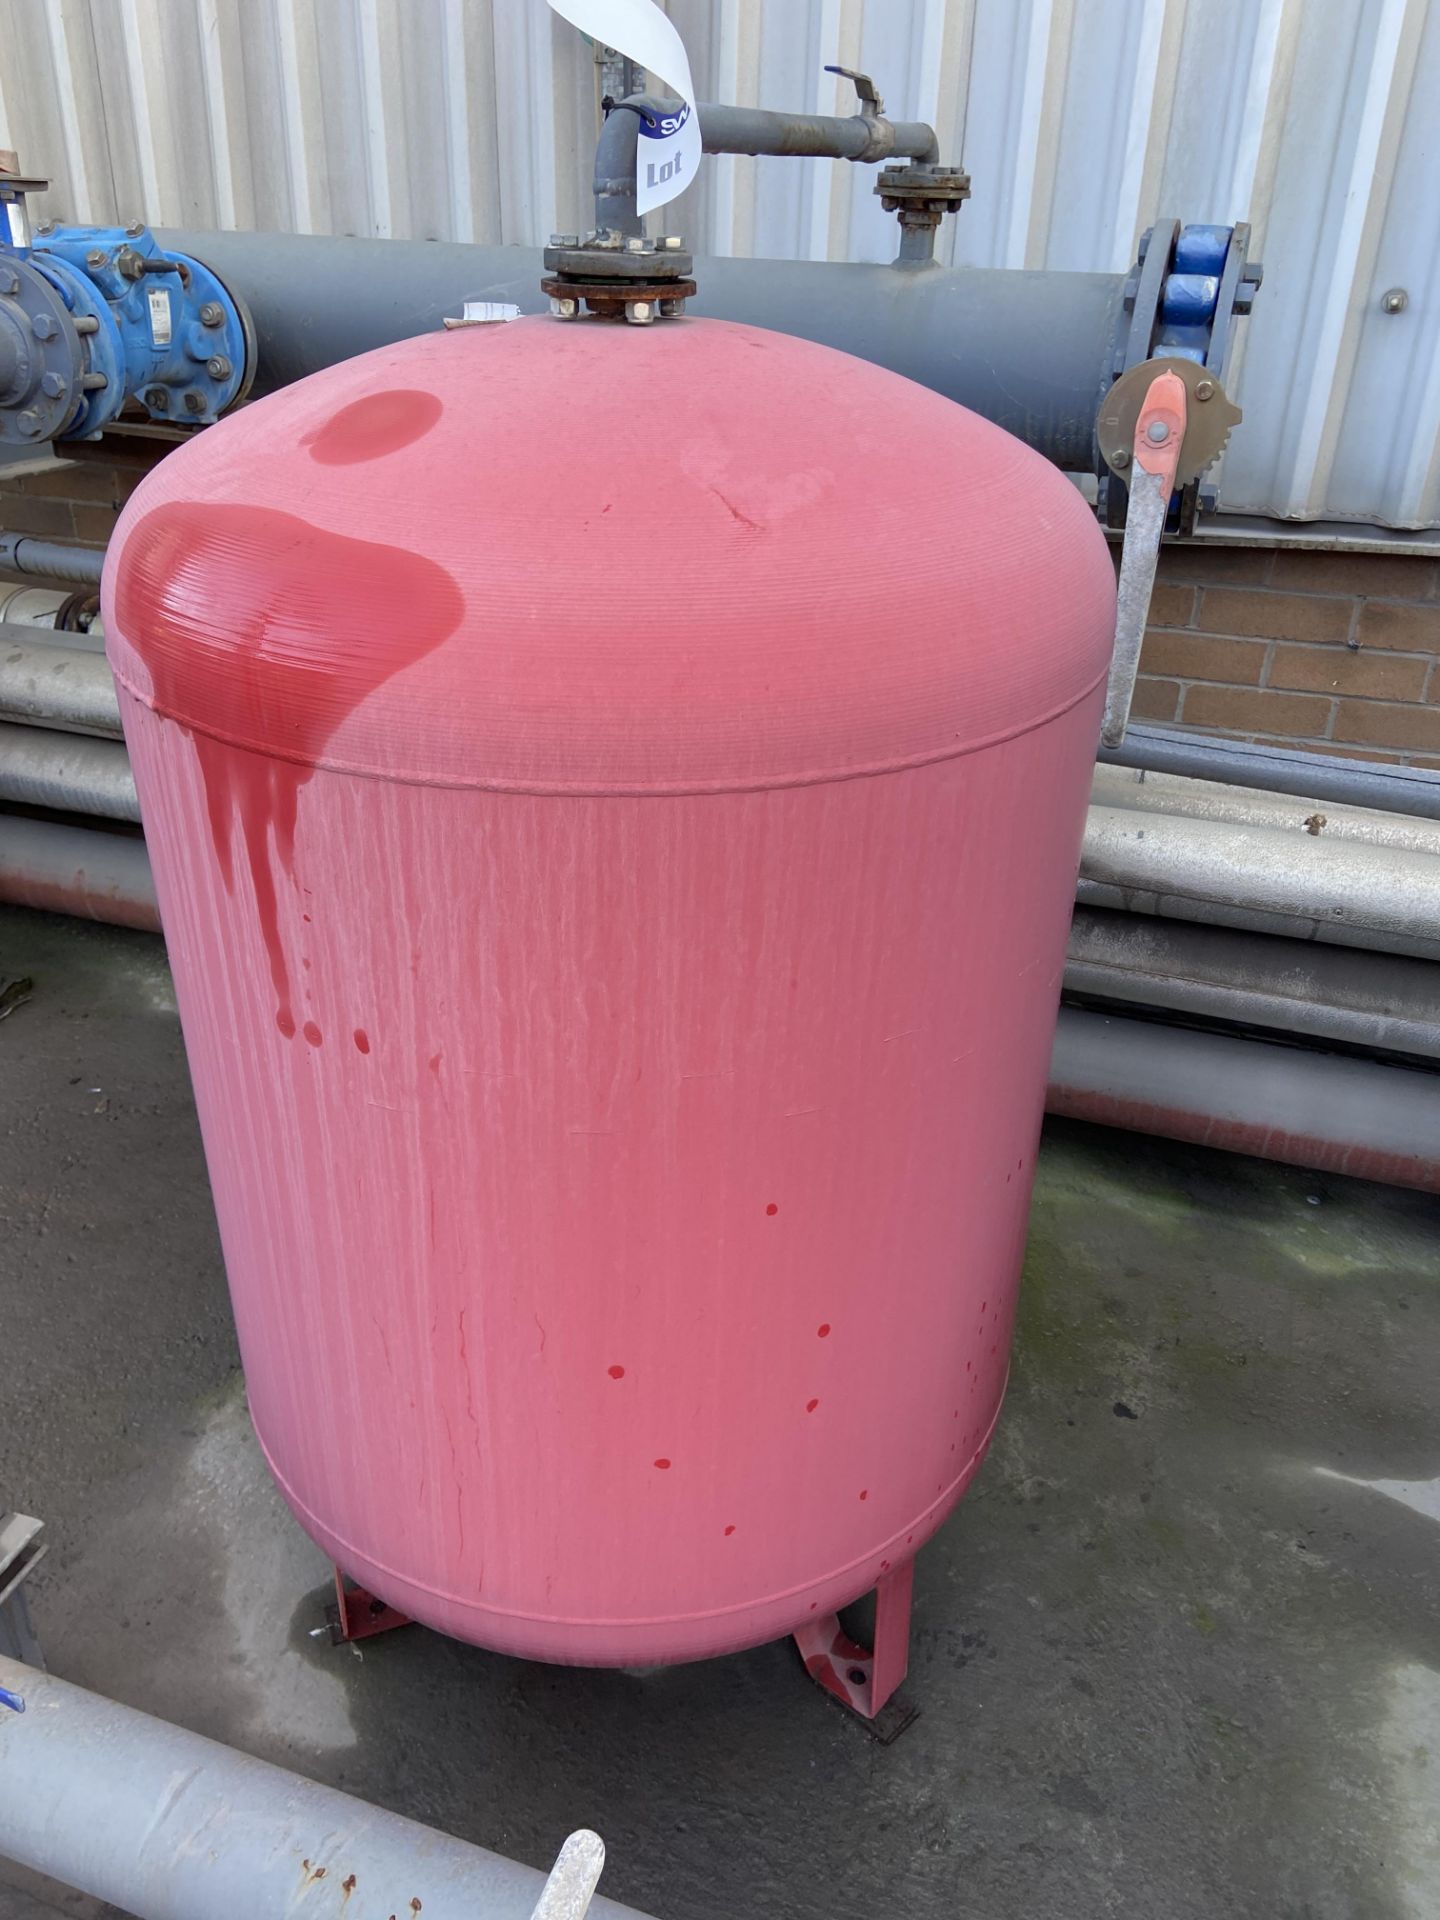 Flamco Expansion Vessel, approx. 800mm x 700mm deep (please note this lot is part of combination lot